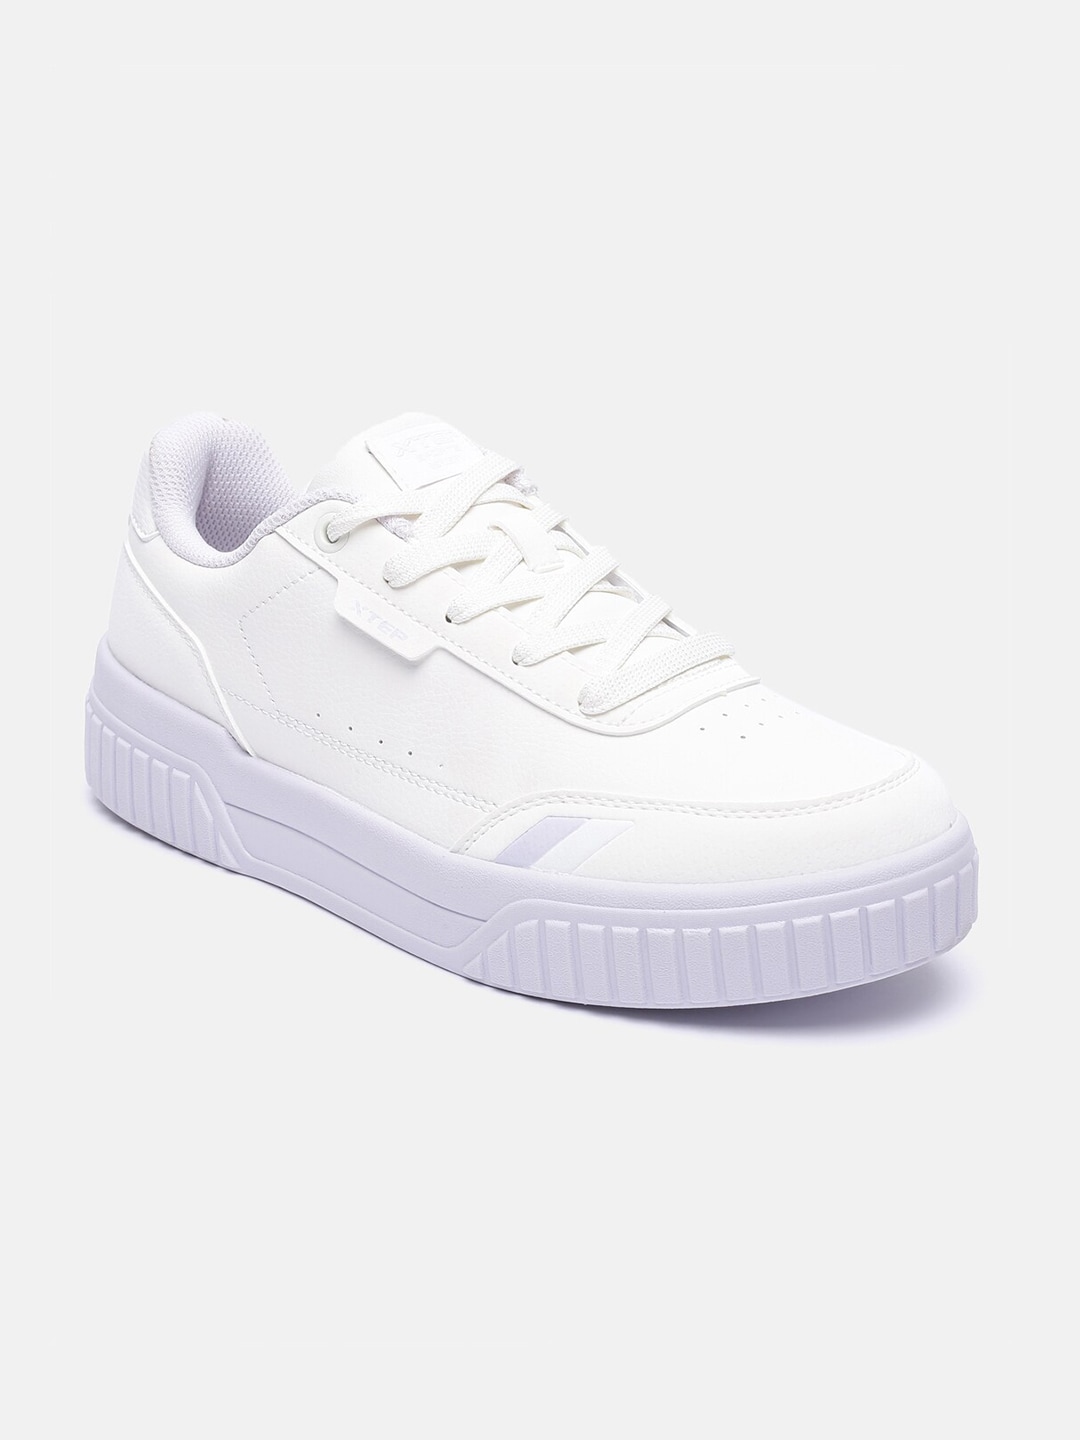 Xtep Women White Skateboarding Non-Marking Shoes Price in India